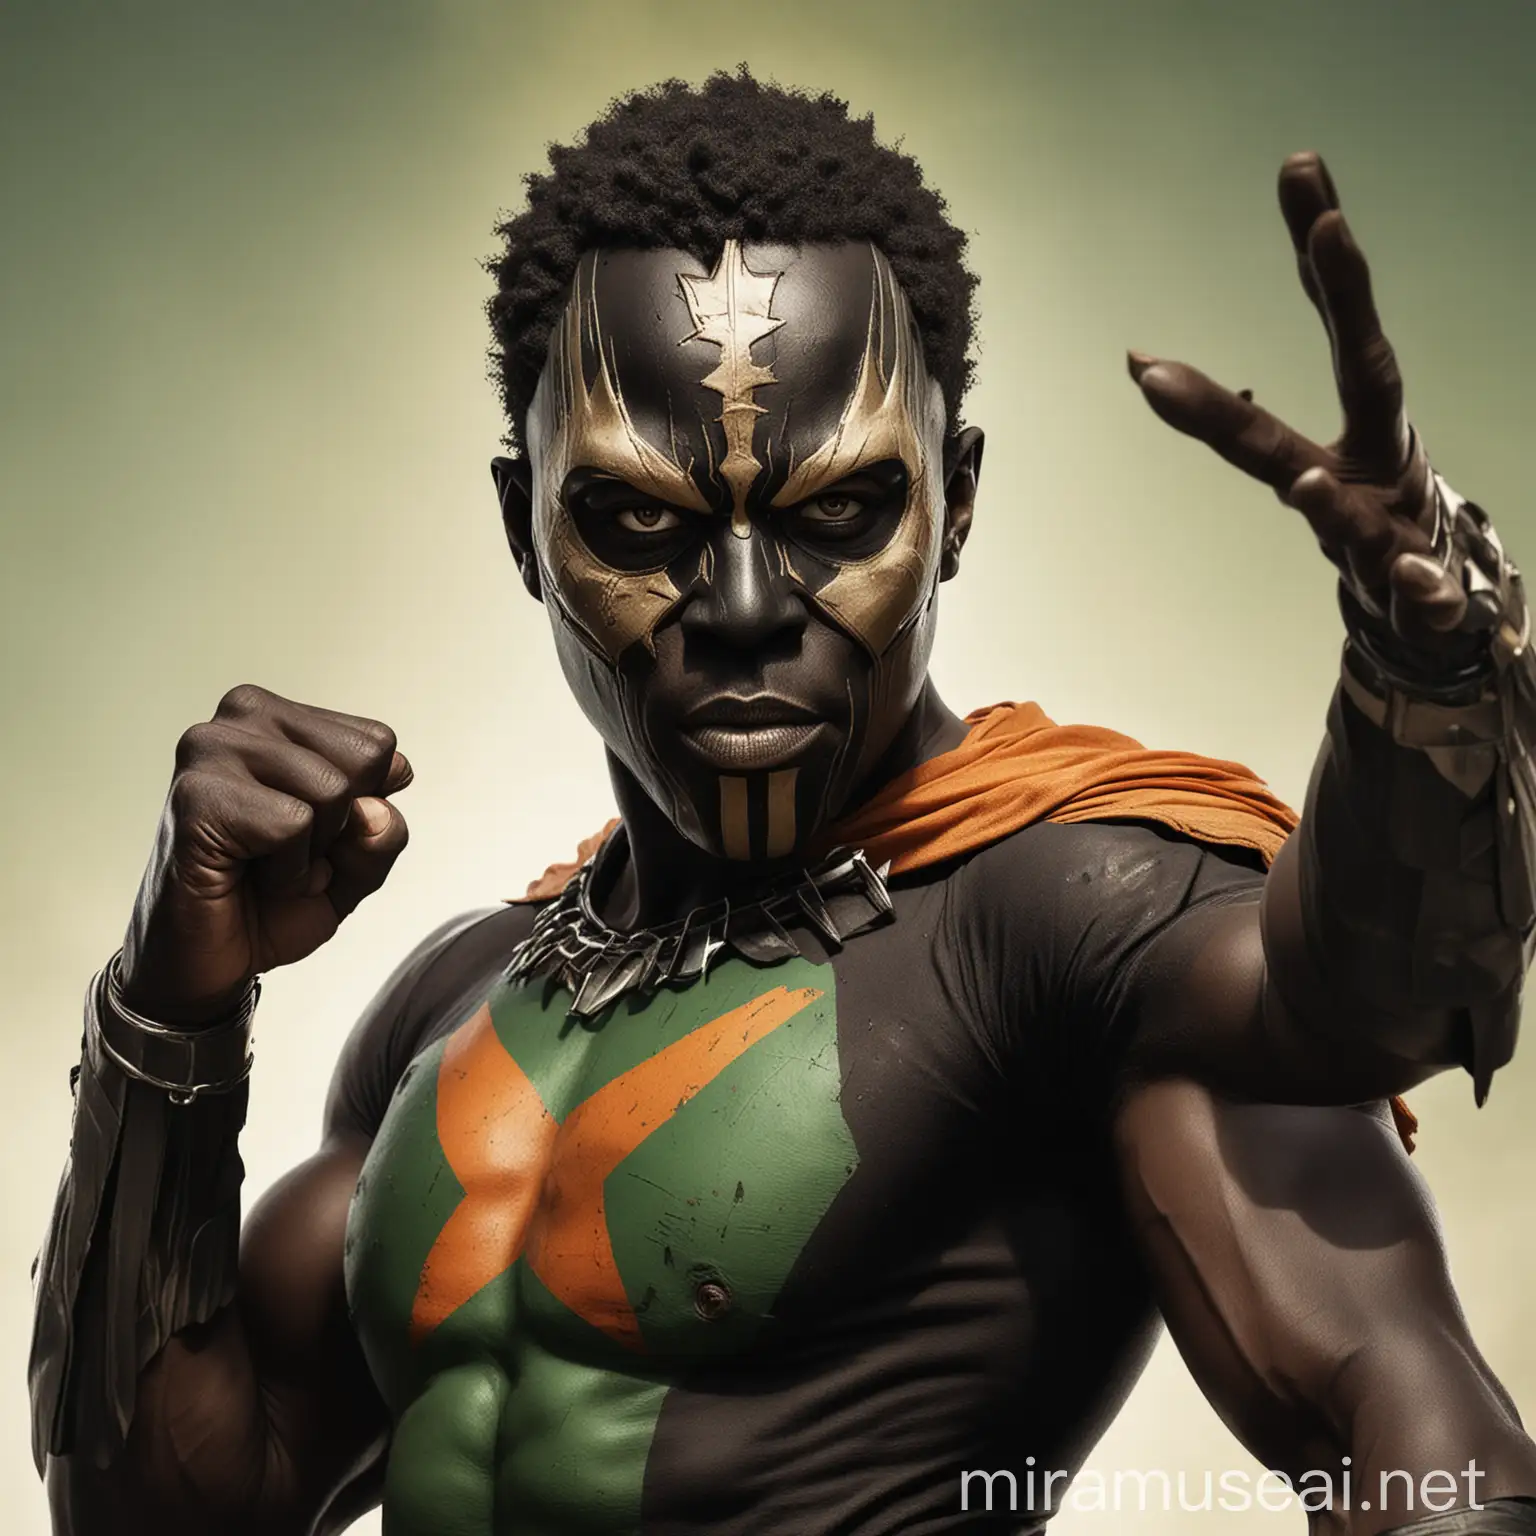 African Superhero with Black Mask and Orange White and Green Accents